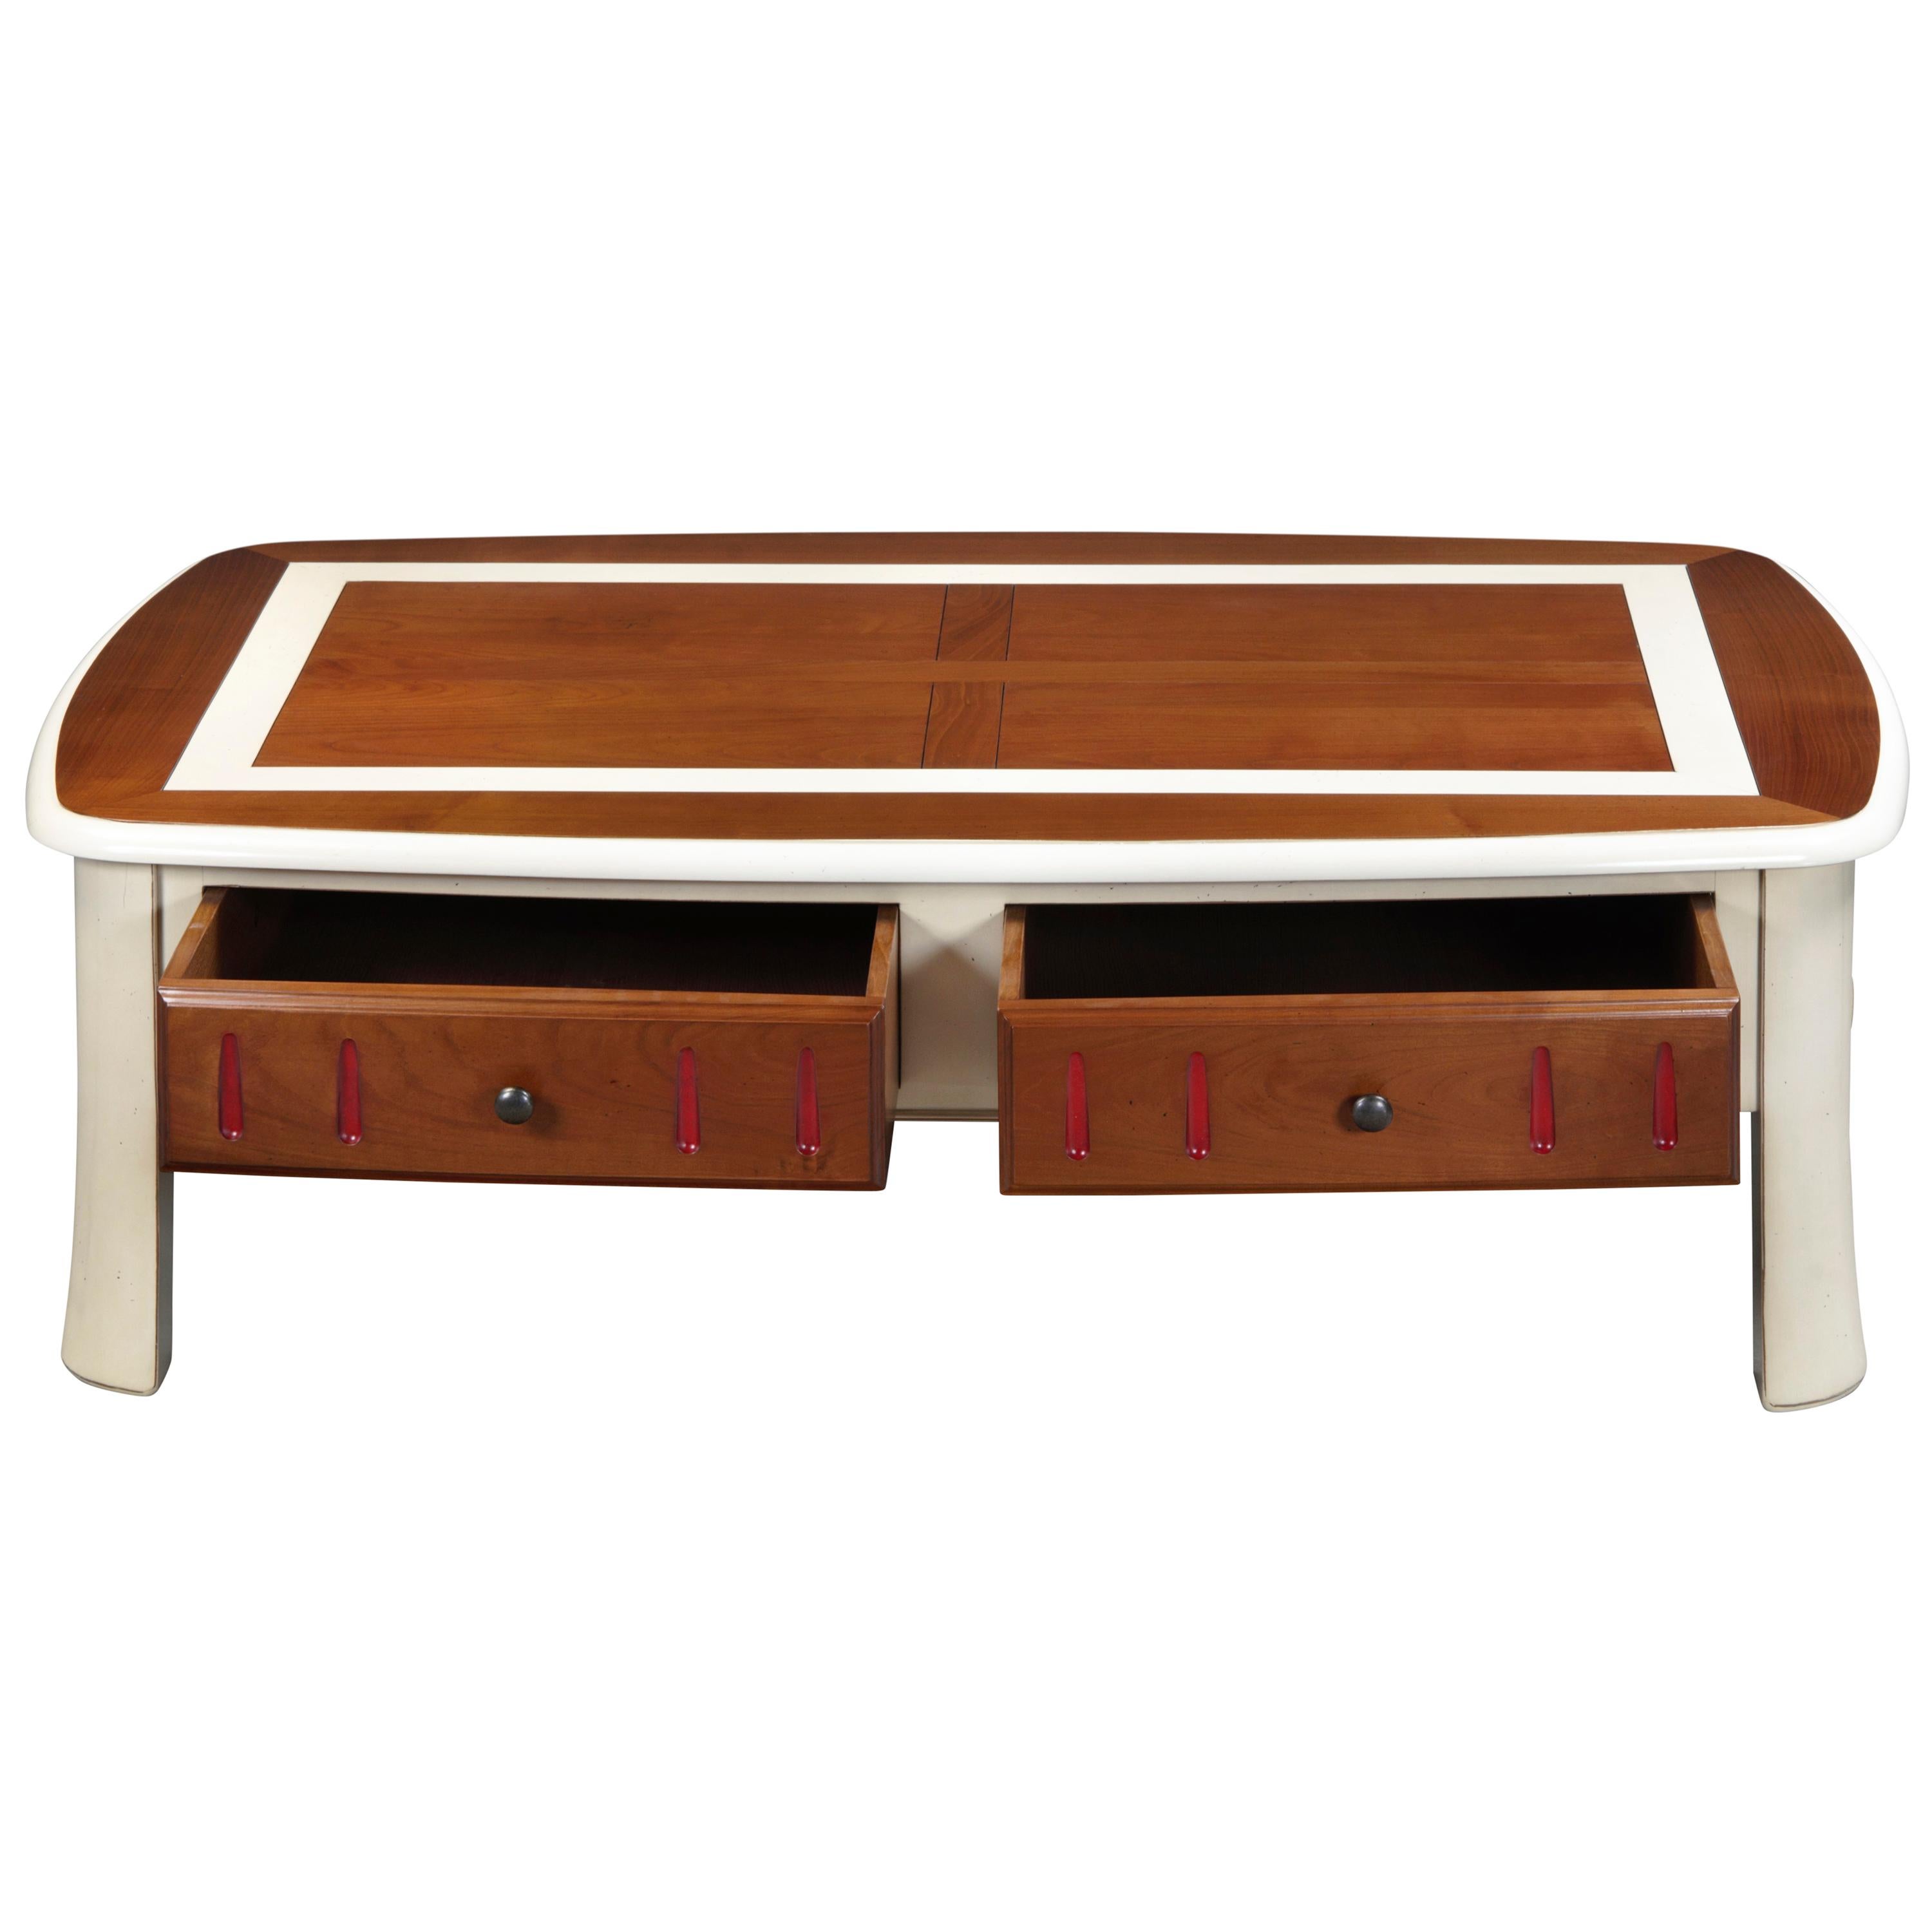 Coffee Table Tradition in Cherry Wood with 2 Drawers, 100% Made in France For Sale 2